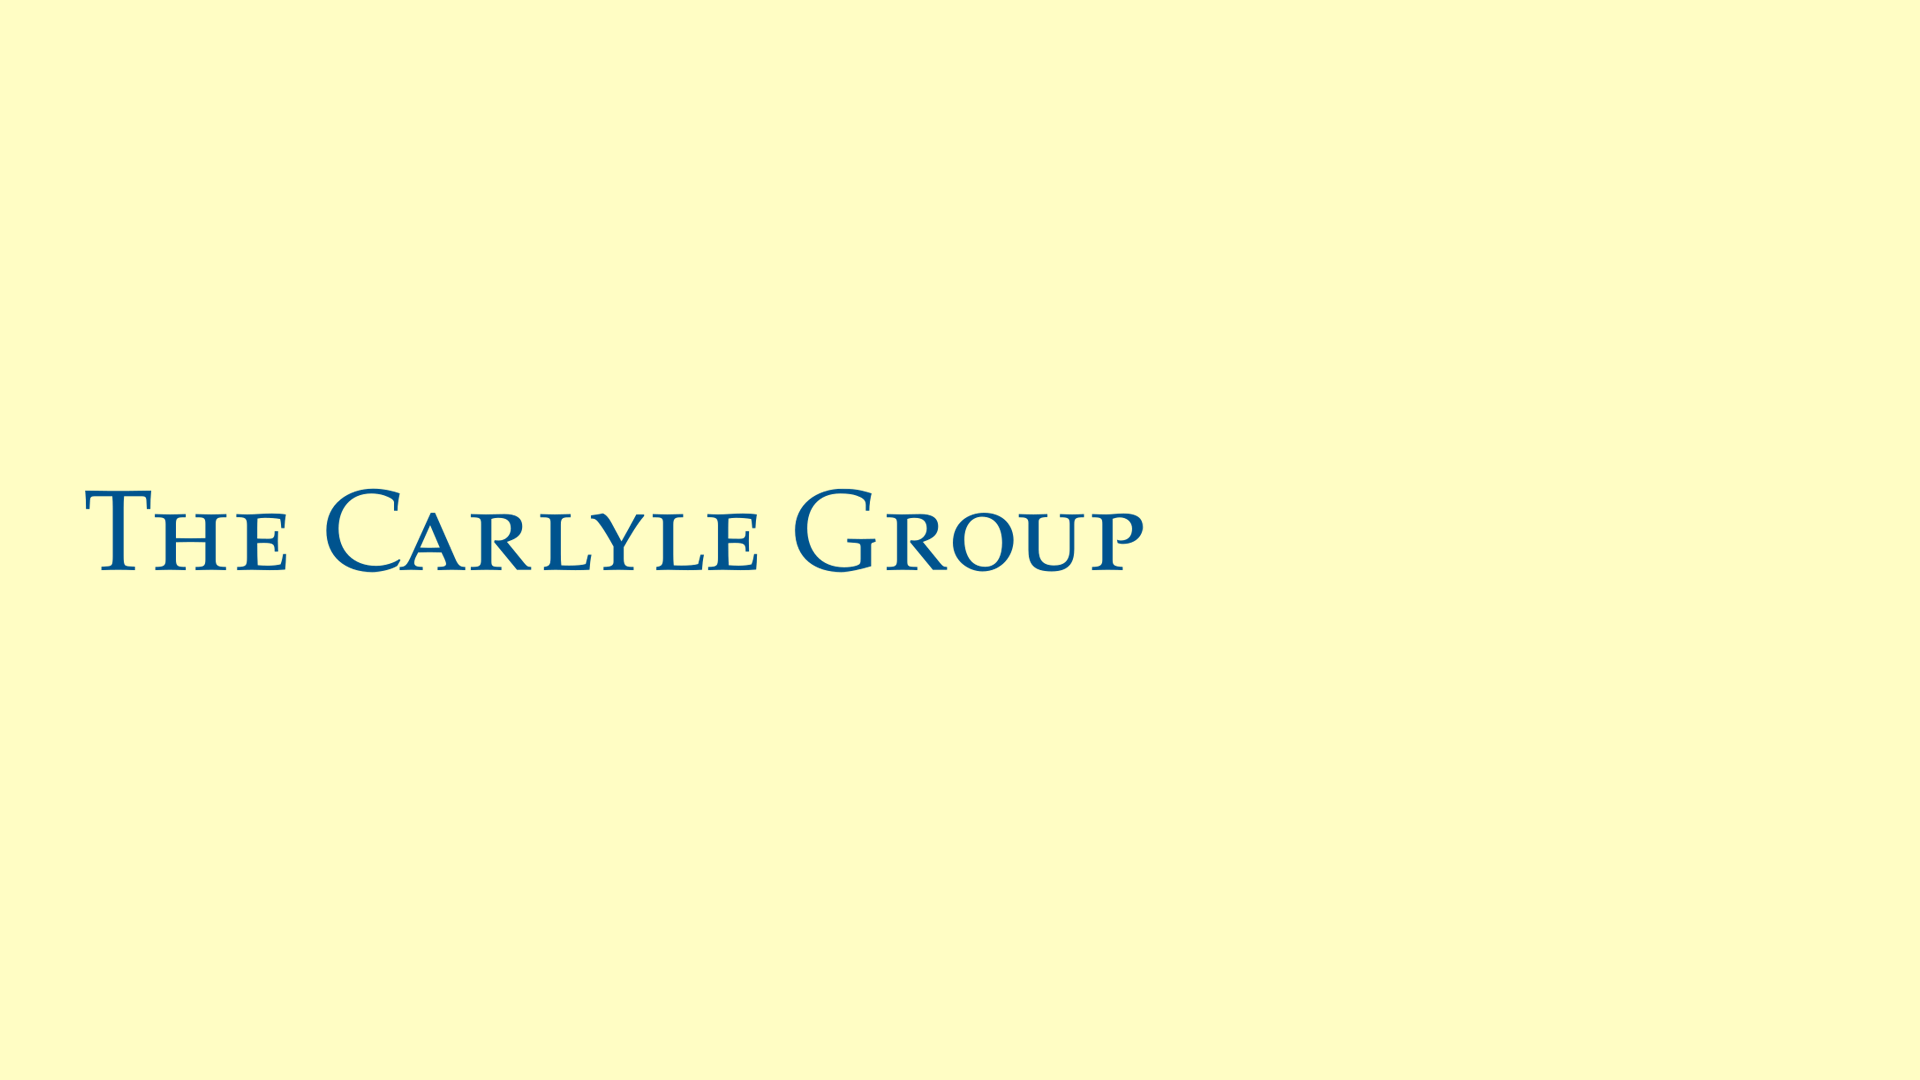 Illustration of The Carlyle Group logo expanding to include more O's